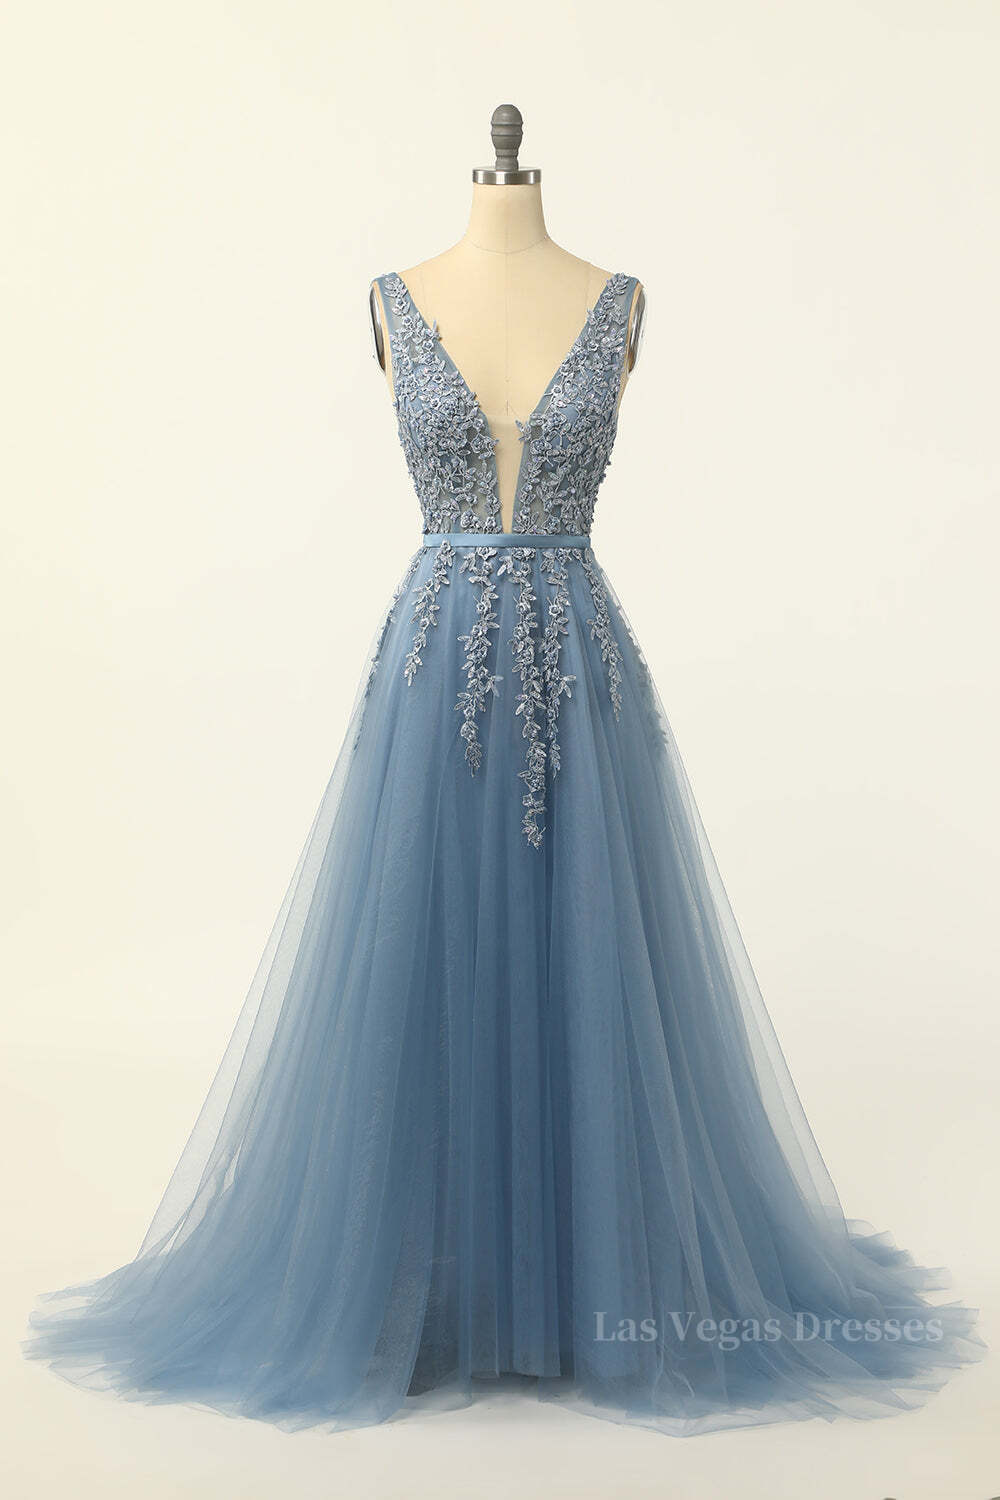 Classic Blue A-line Tulle and Appliques Long Formal Dress